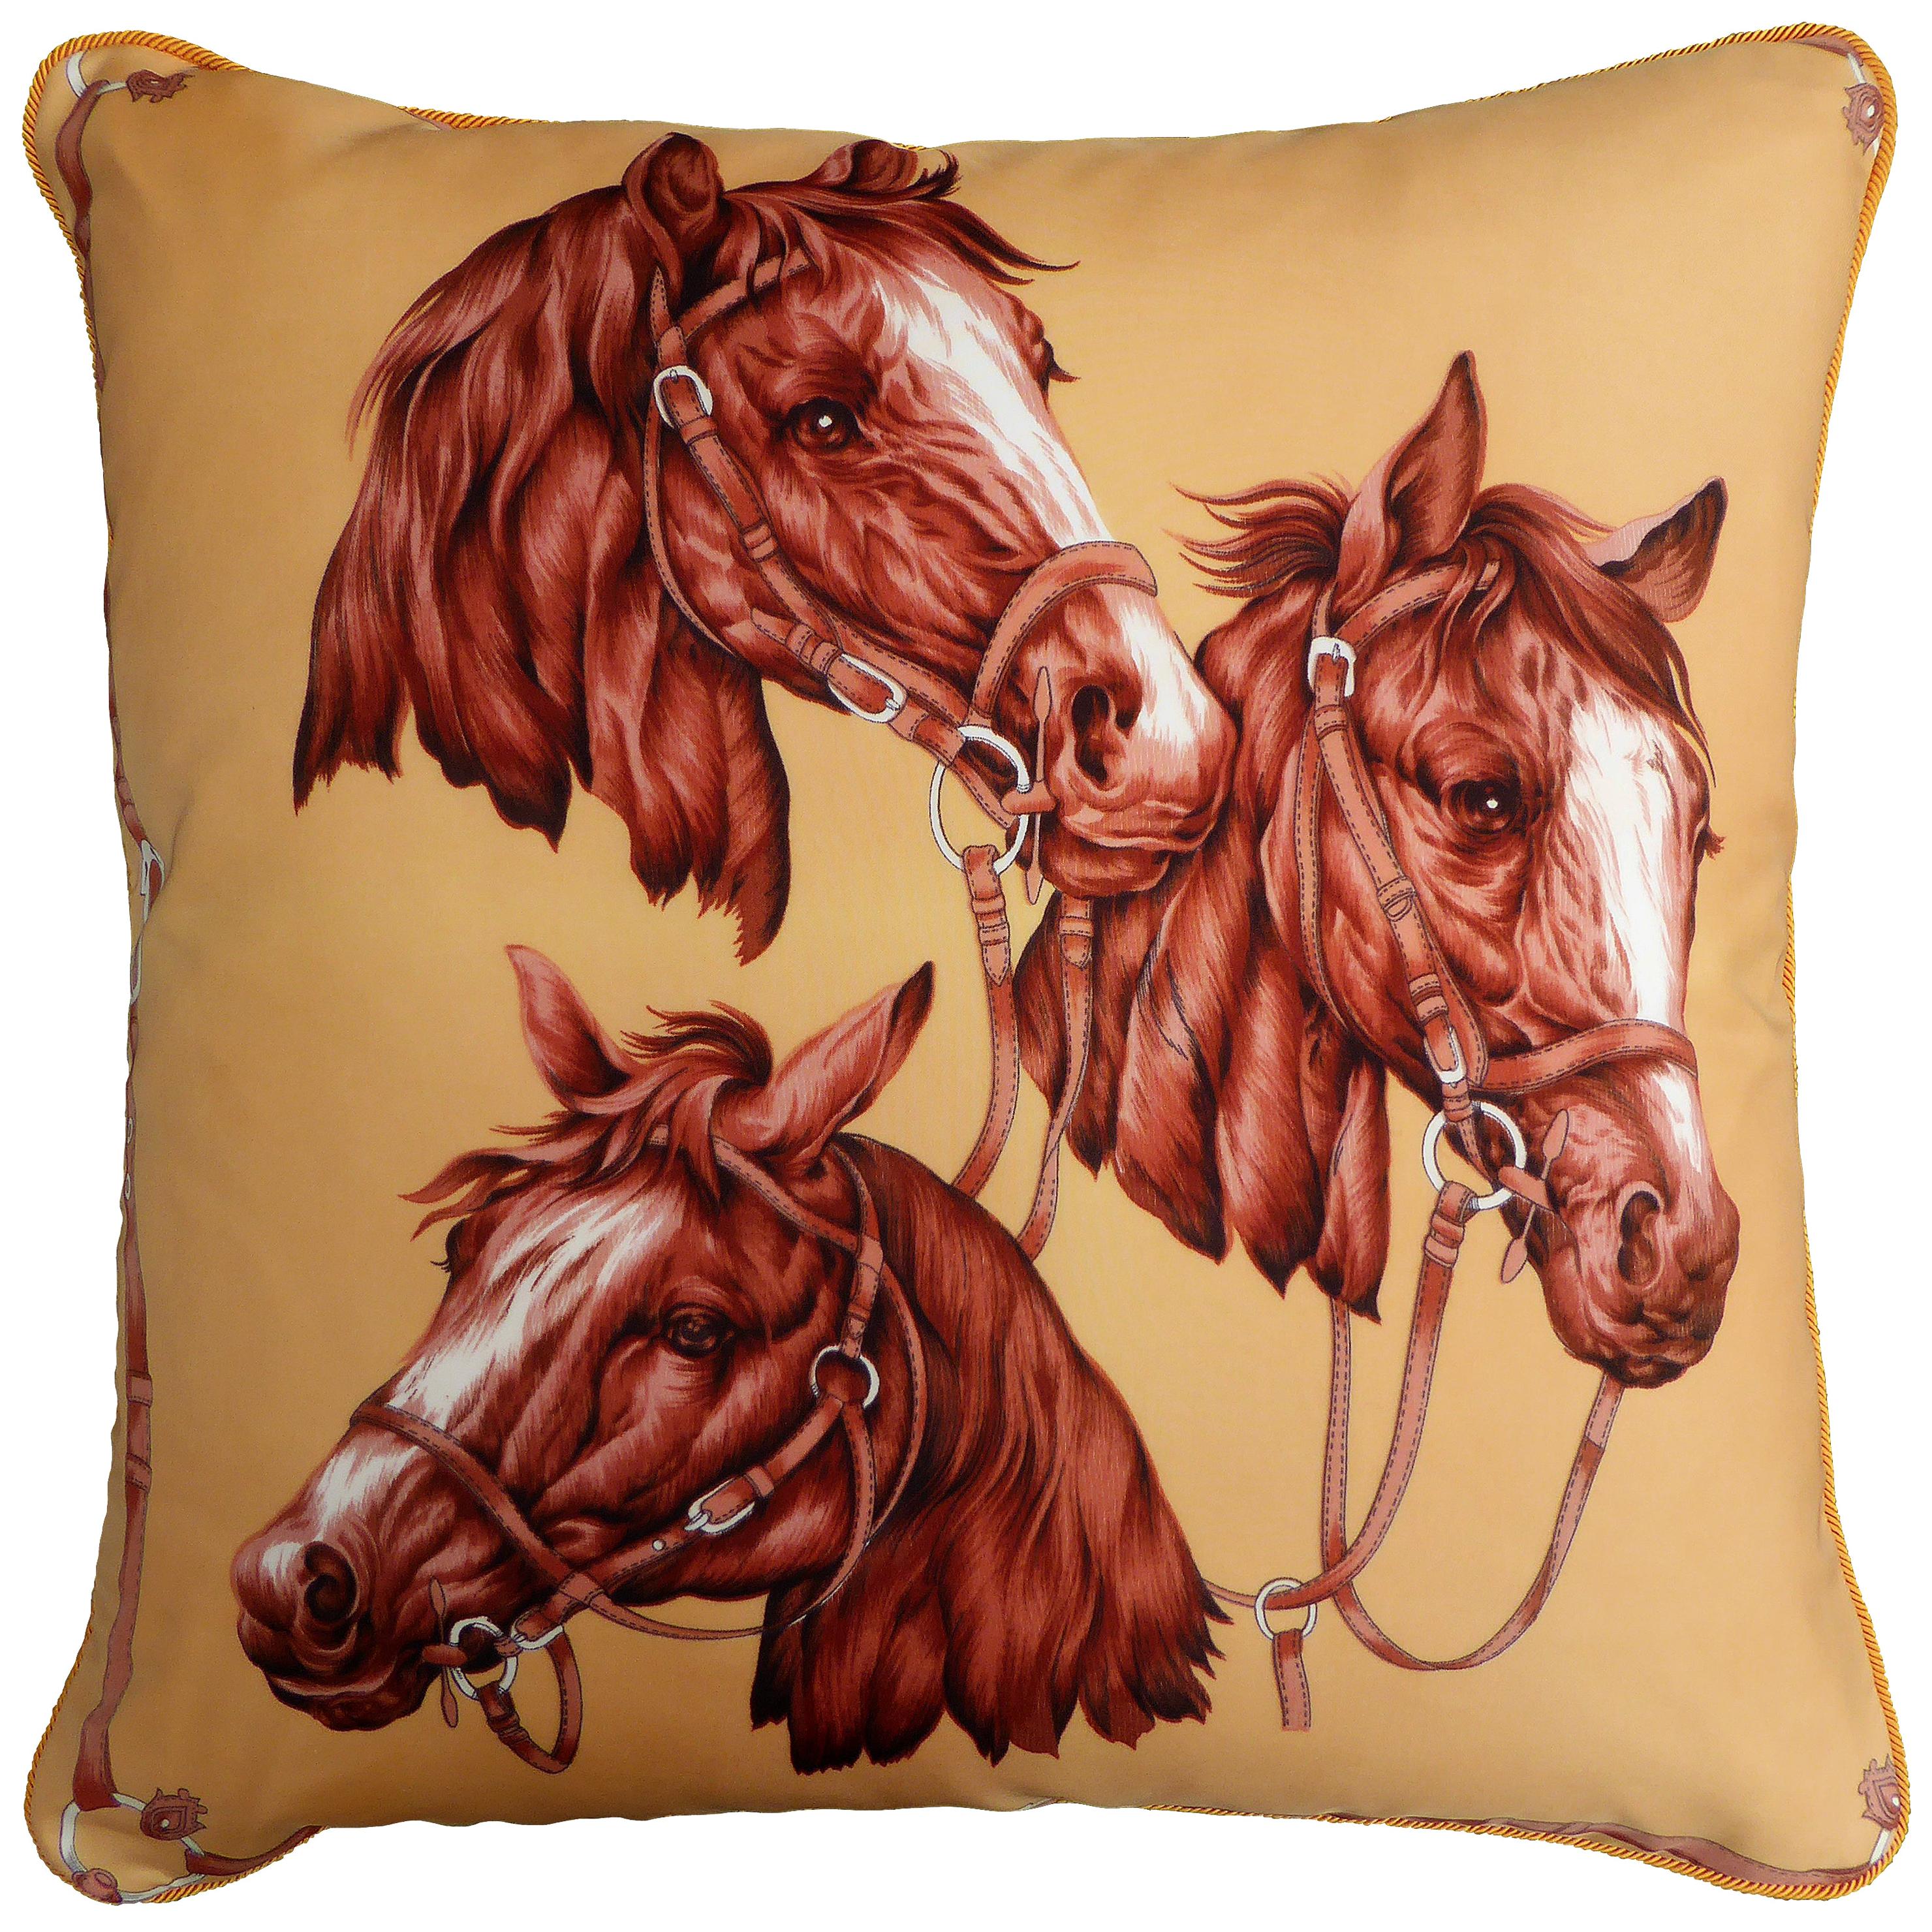 'Vintage Cushions', Luxury Bespoke-Made Pillow 'Pale Horses' British Made